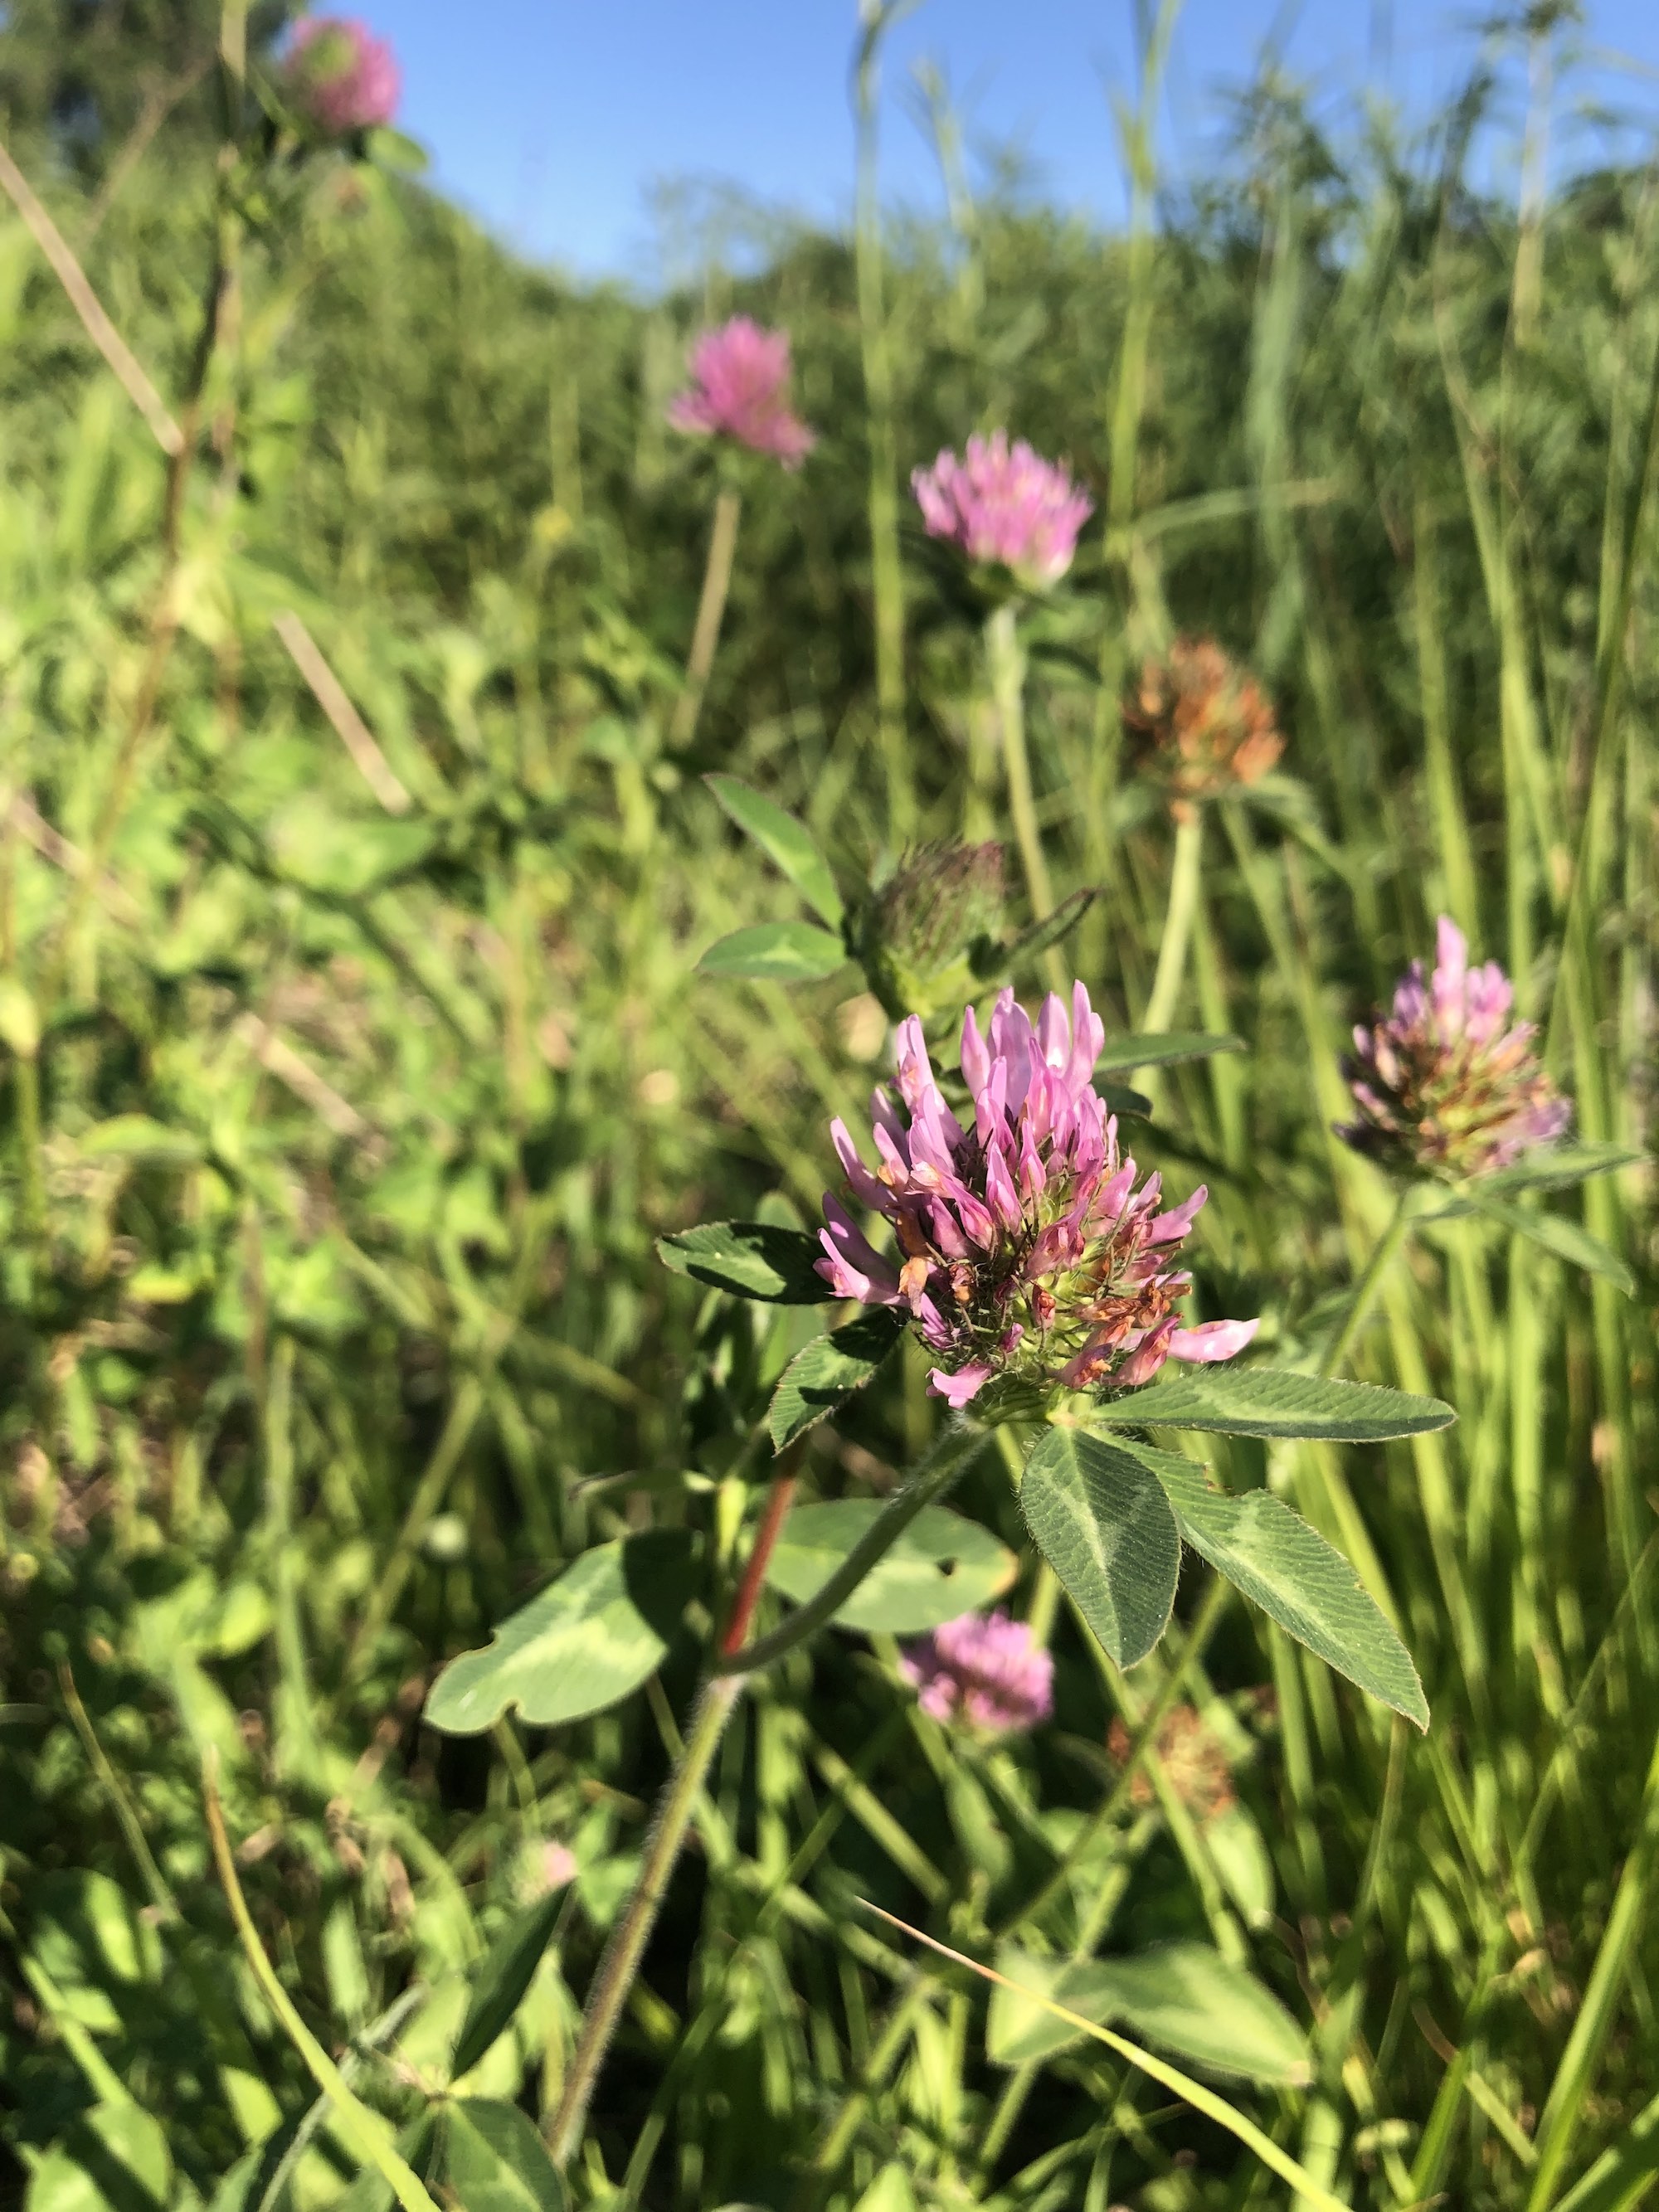 Red Clover in Marion Dunn Prairie in Madison, Wisconsin on June 16, 2021.